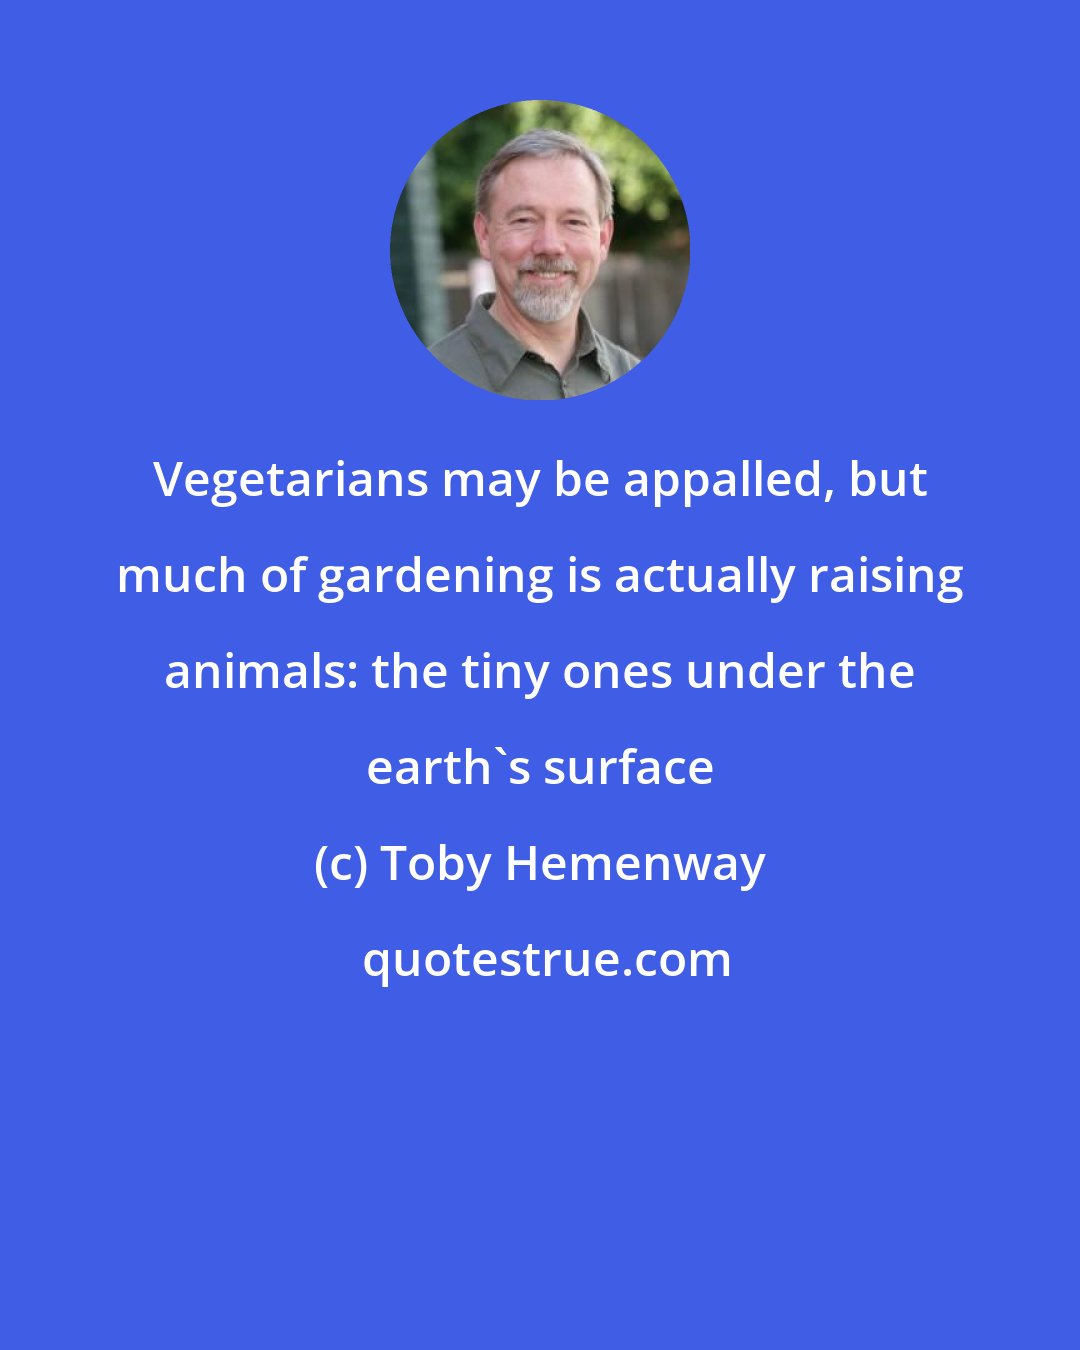 Toby Hemenway: Vegetarians may be appalled, but much of gardening is actually raising animals: the tiny ones under the earth's surface